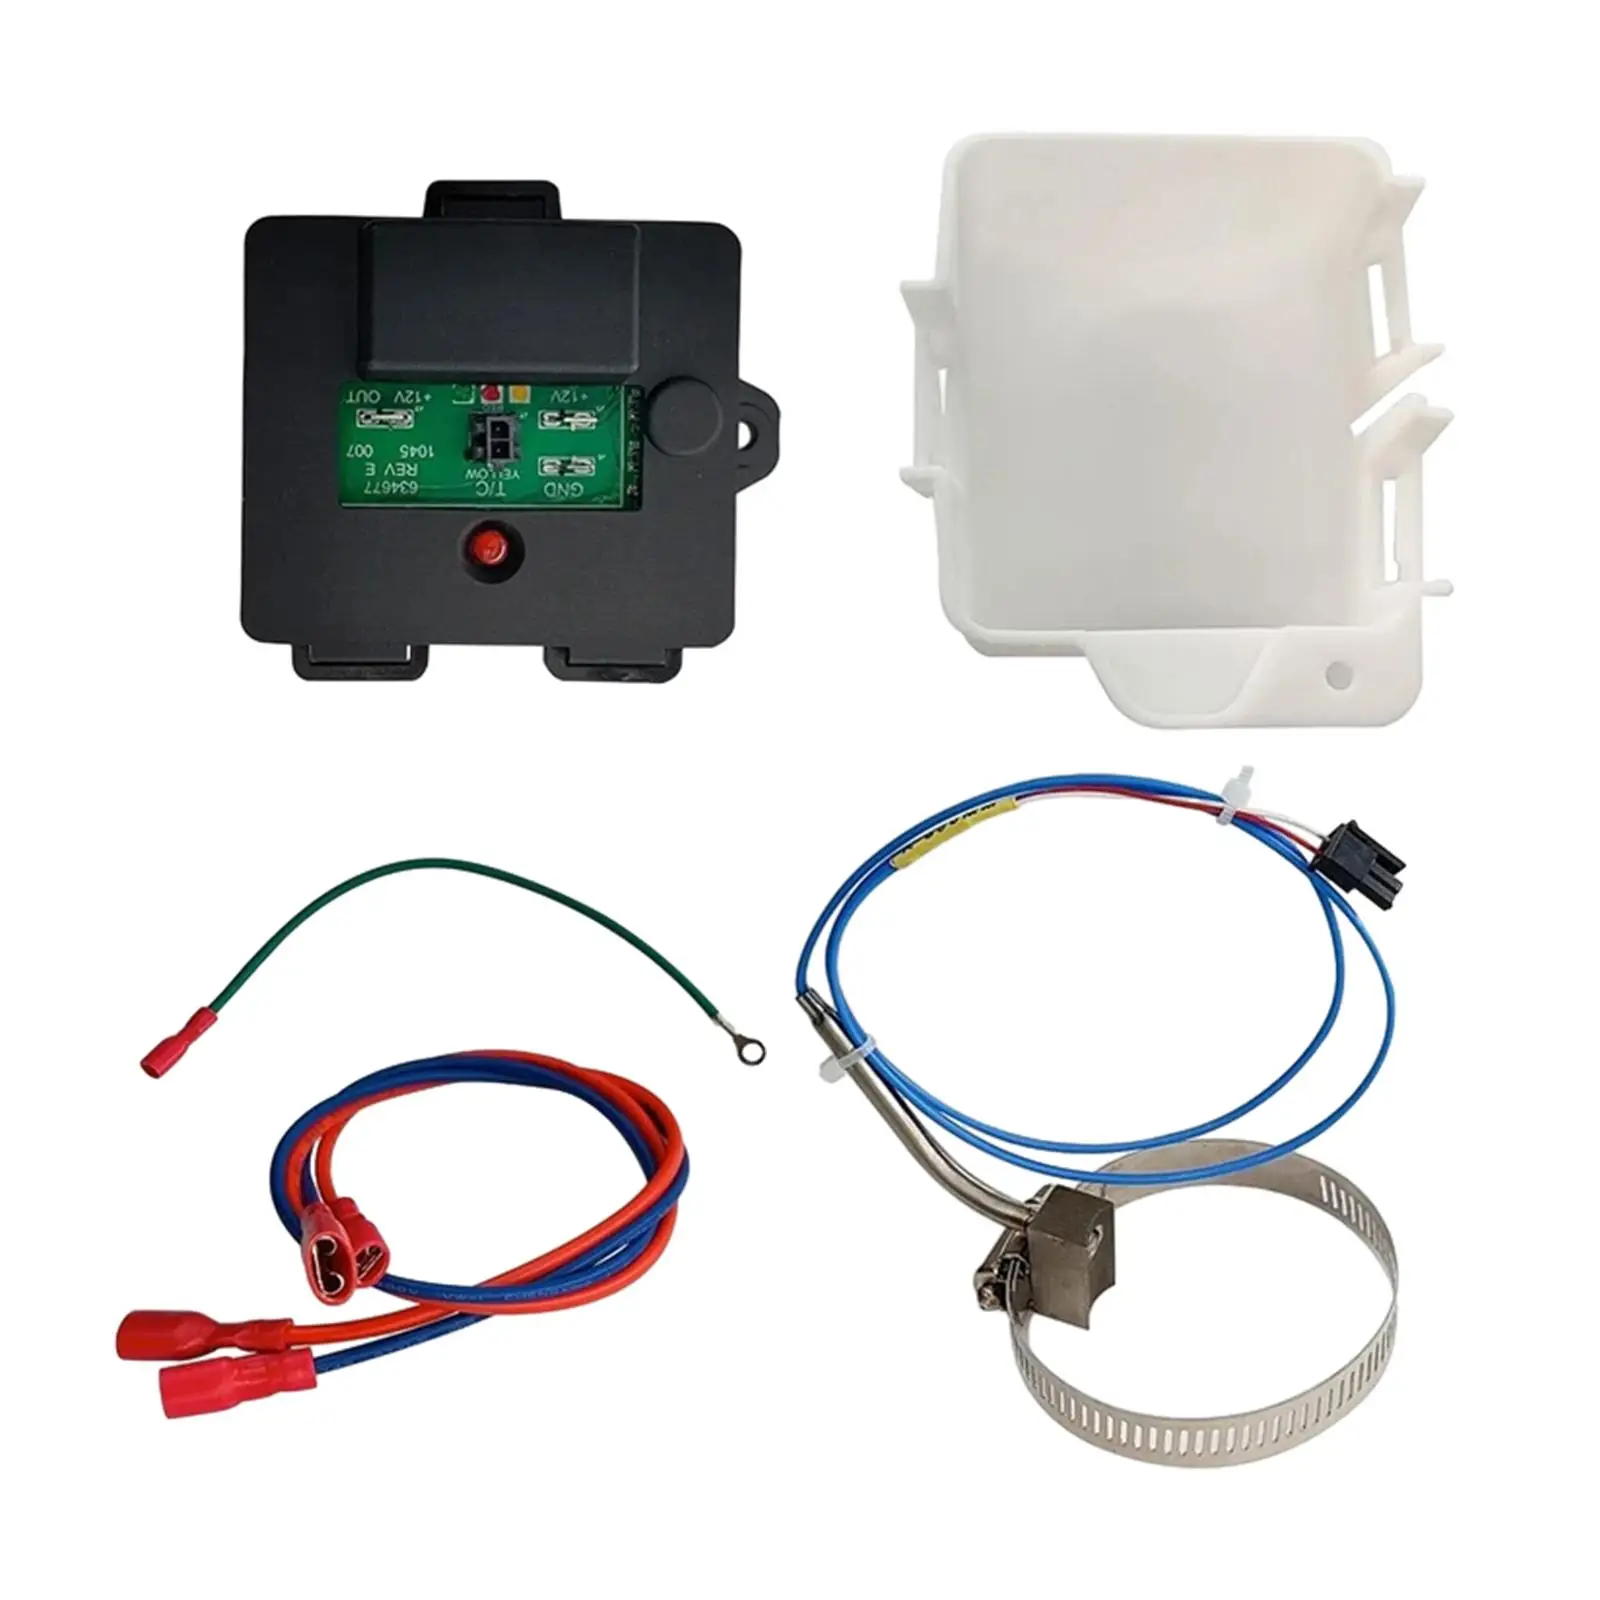 637360 Temp Monitor Control Kits Portable Replacement Parts Cooling Control Kits Professional Refrigerator Parts Home Kitchen